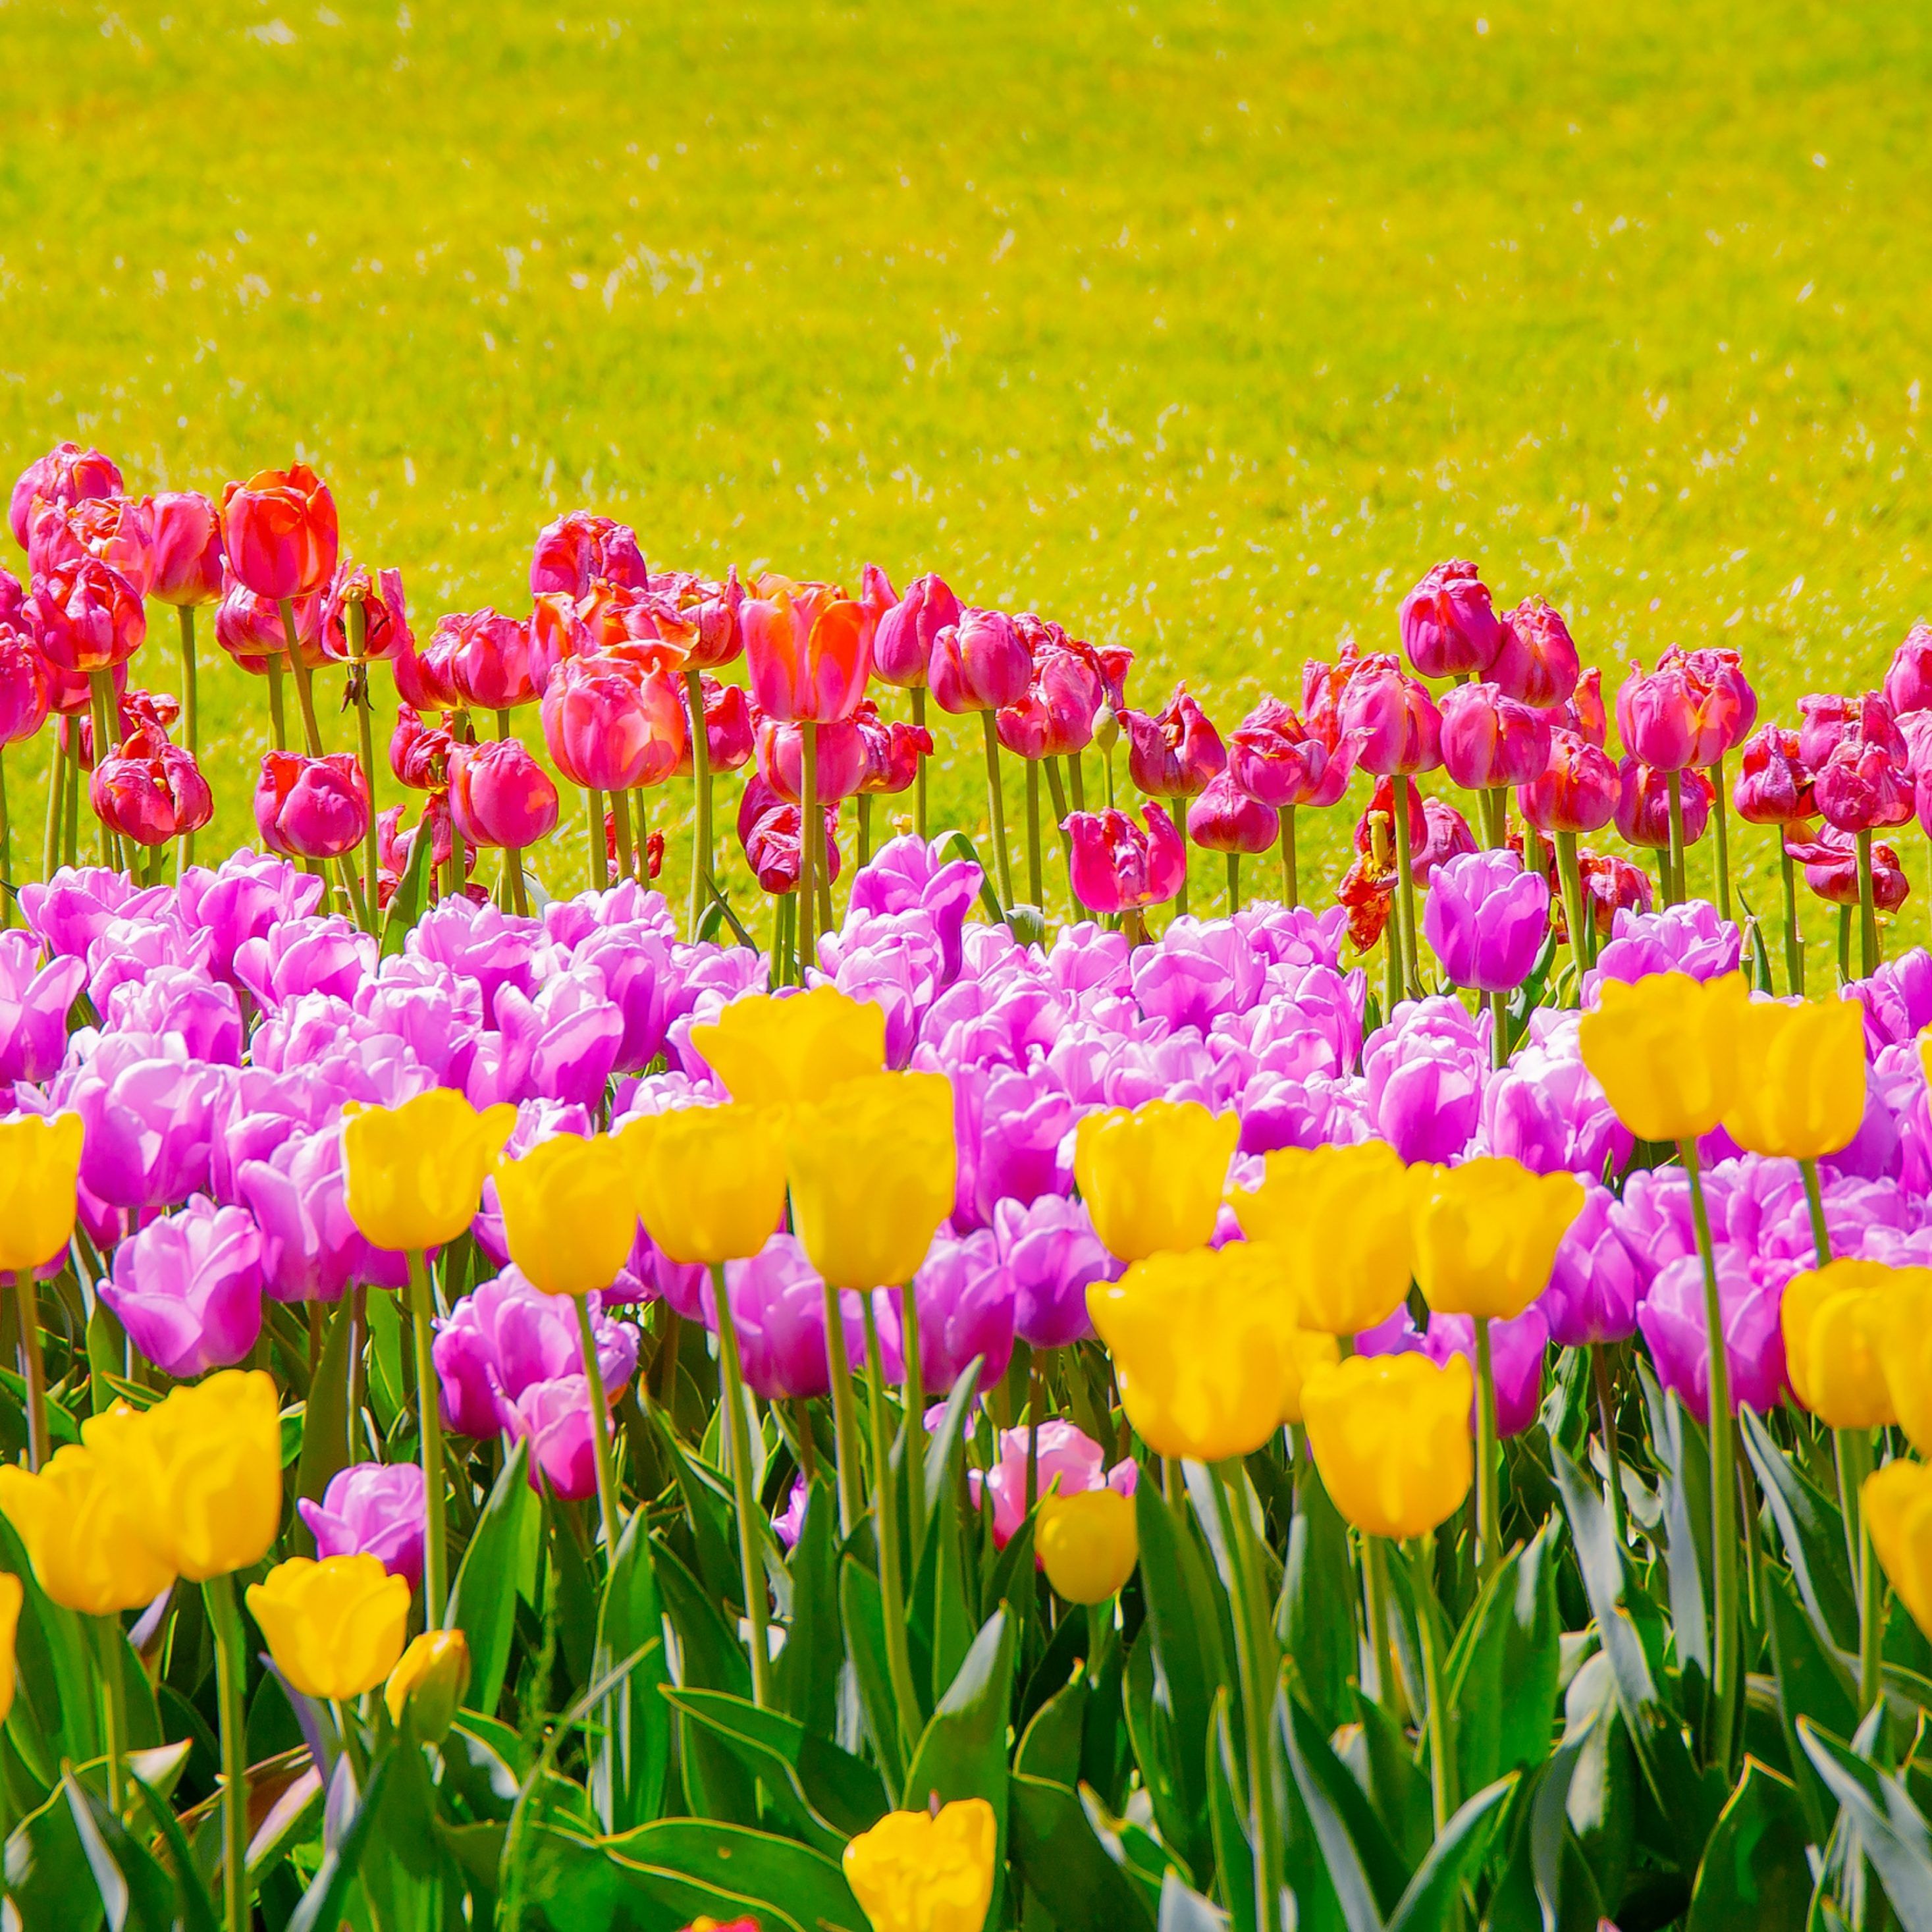 A field of pink and yellow tulips. - Beautiful